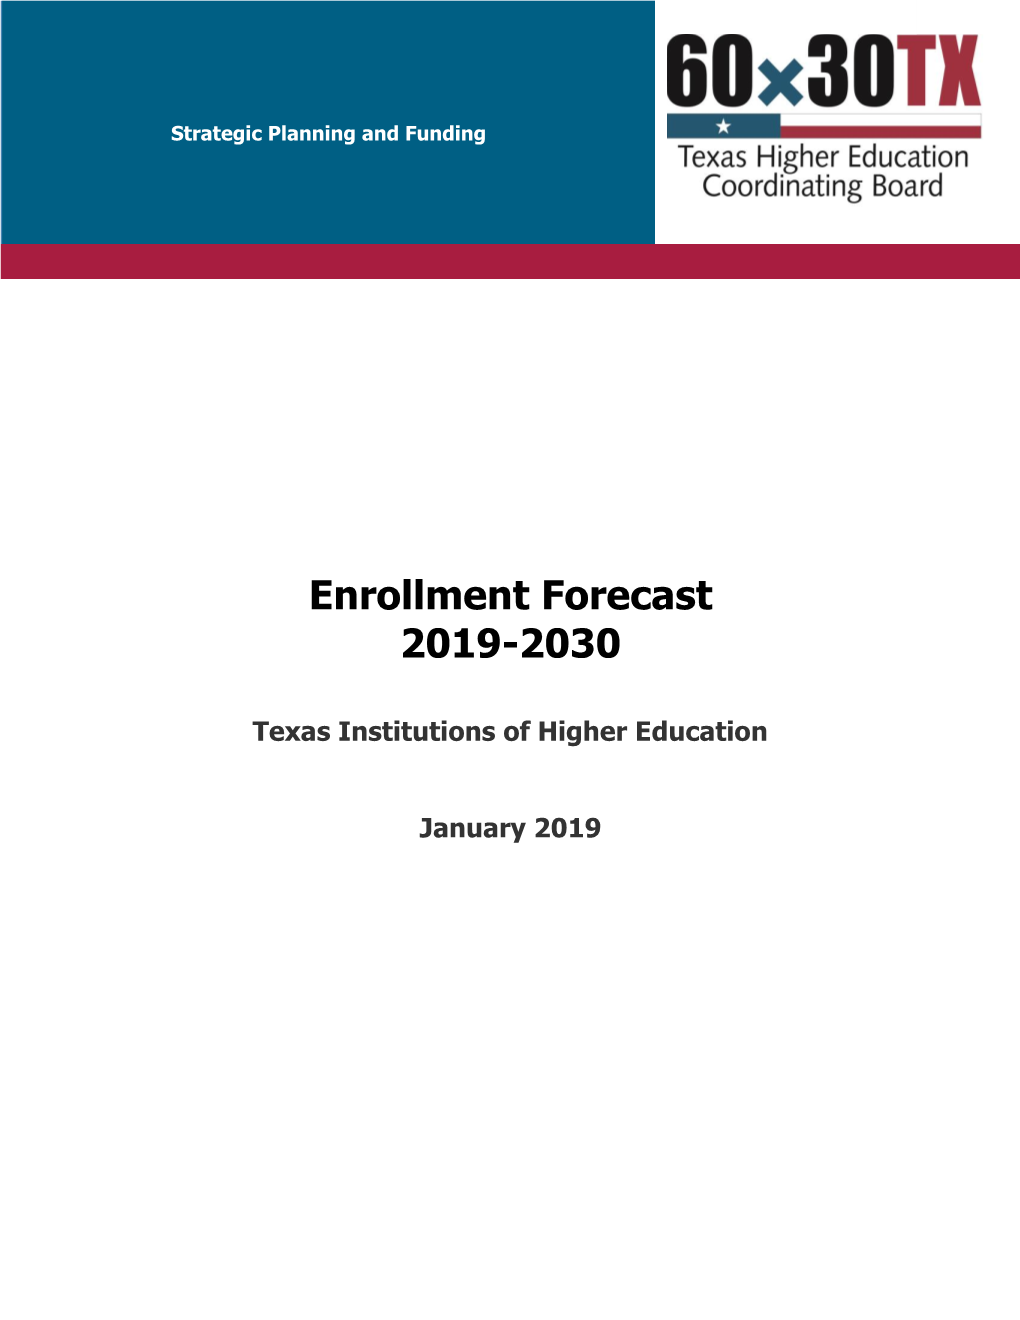 Enrollment Forecast 2019-2030 Texas Institutions of Higher Education